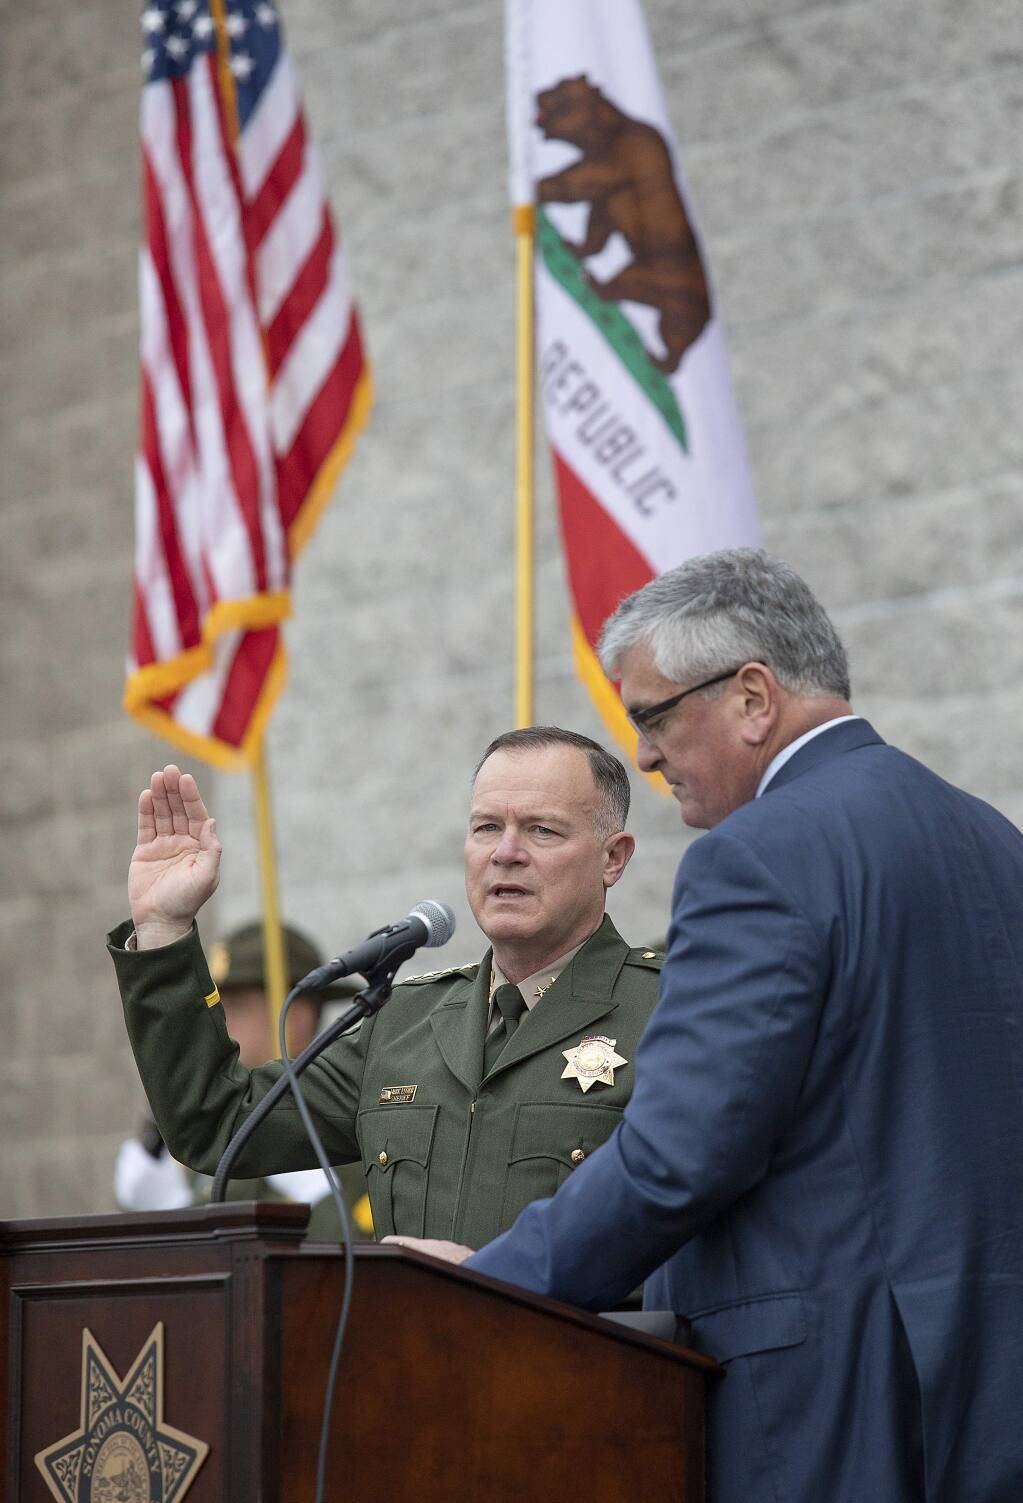 Sonoma County Sheriff Mark Essick RENEGES ON SACRED OATH-  I will be exemplary in obeying the laws of the land and the regulations of my department.